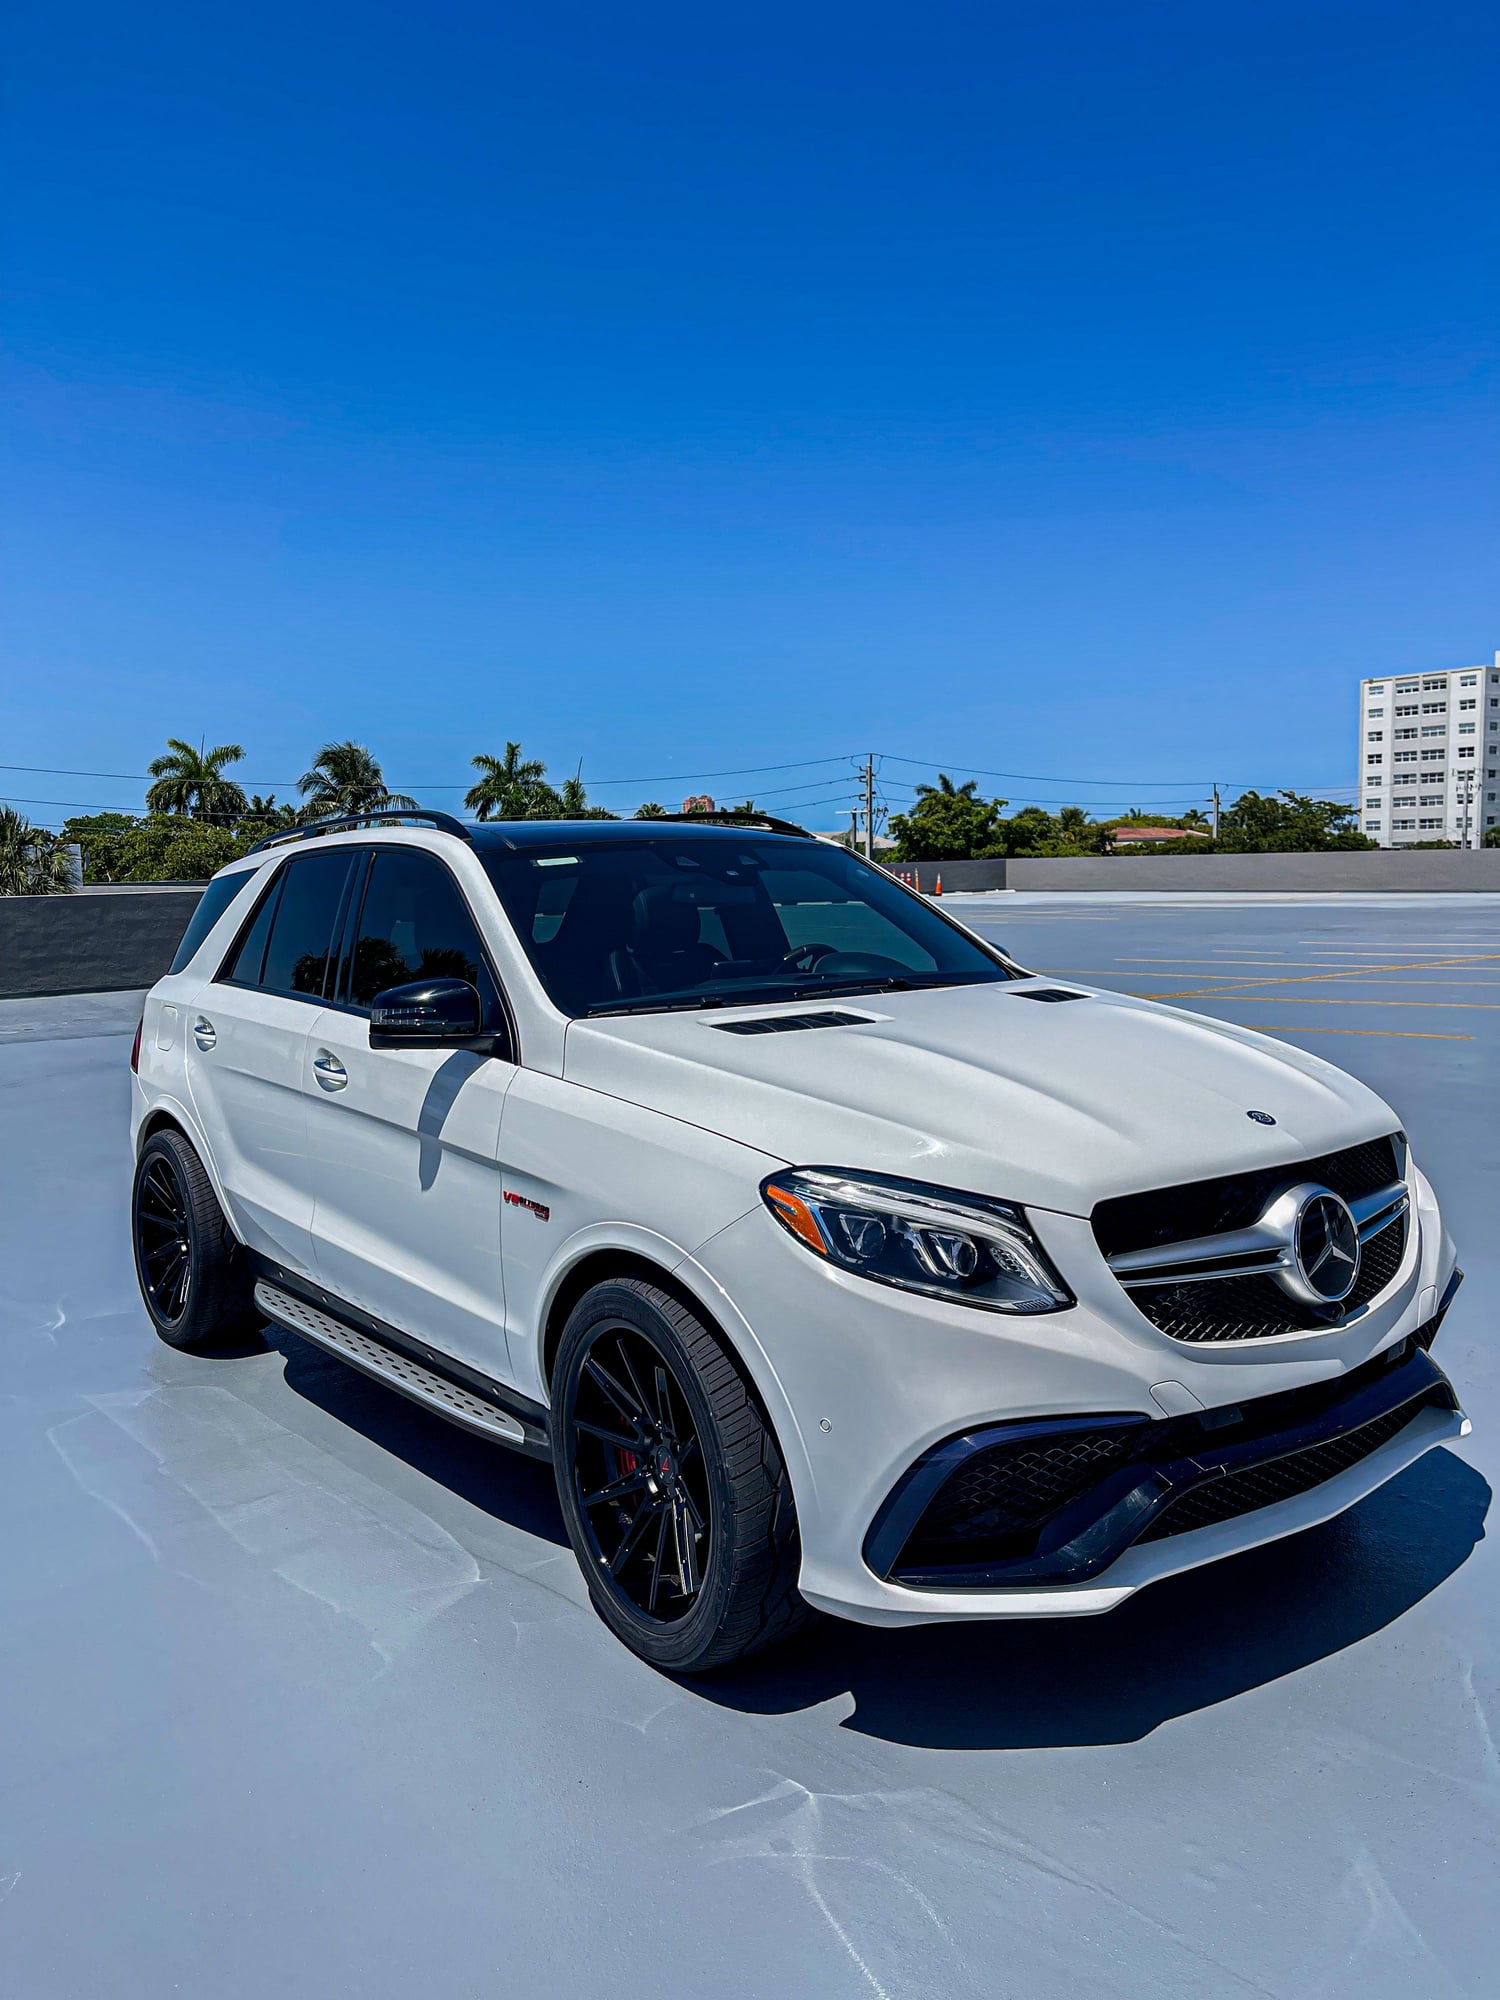 2016 Mercedes-Benz GLE63 AMG S - FS 2016 GLE63s w/ Bumper to Bumper Warranty - Used - Fort Lauderdale, FL 33304, United States